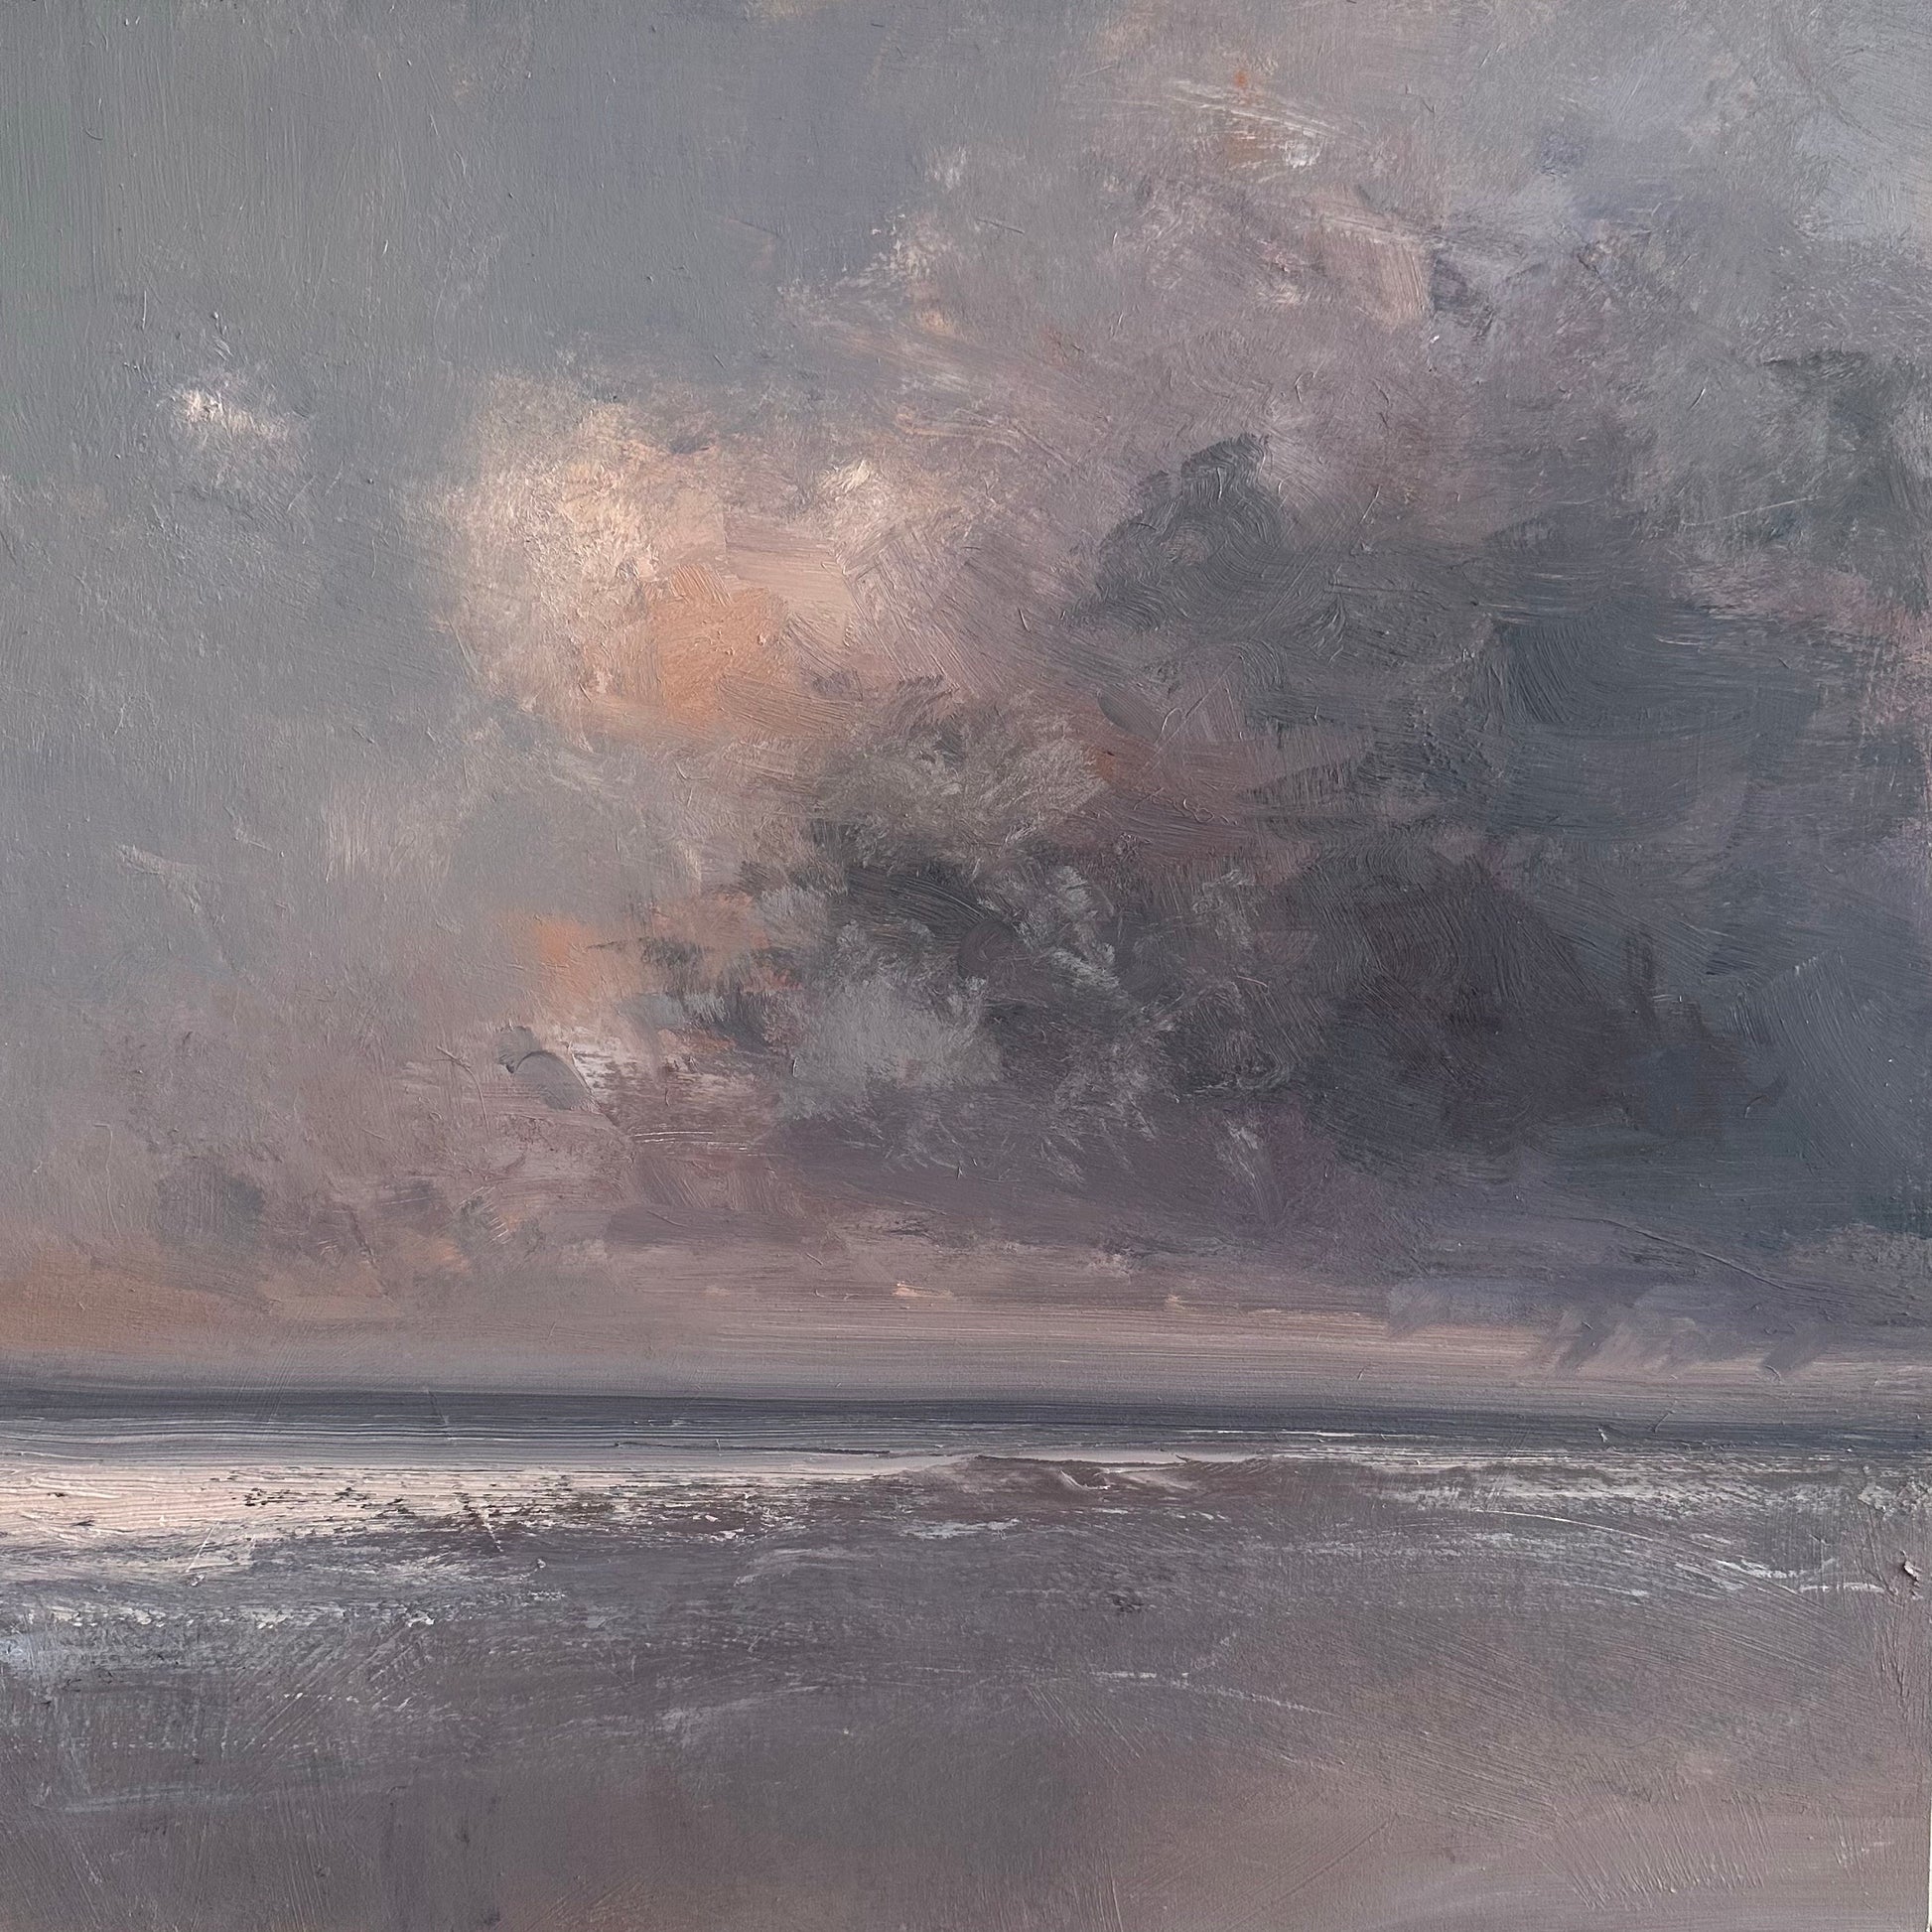 Silver Light, Oil on panel painting by Richard K Blades. Available from The Point Contemporary, Art Gallery in Cromer, North Norfolk UK